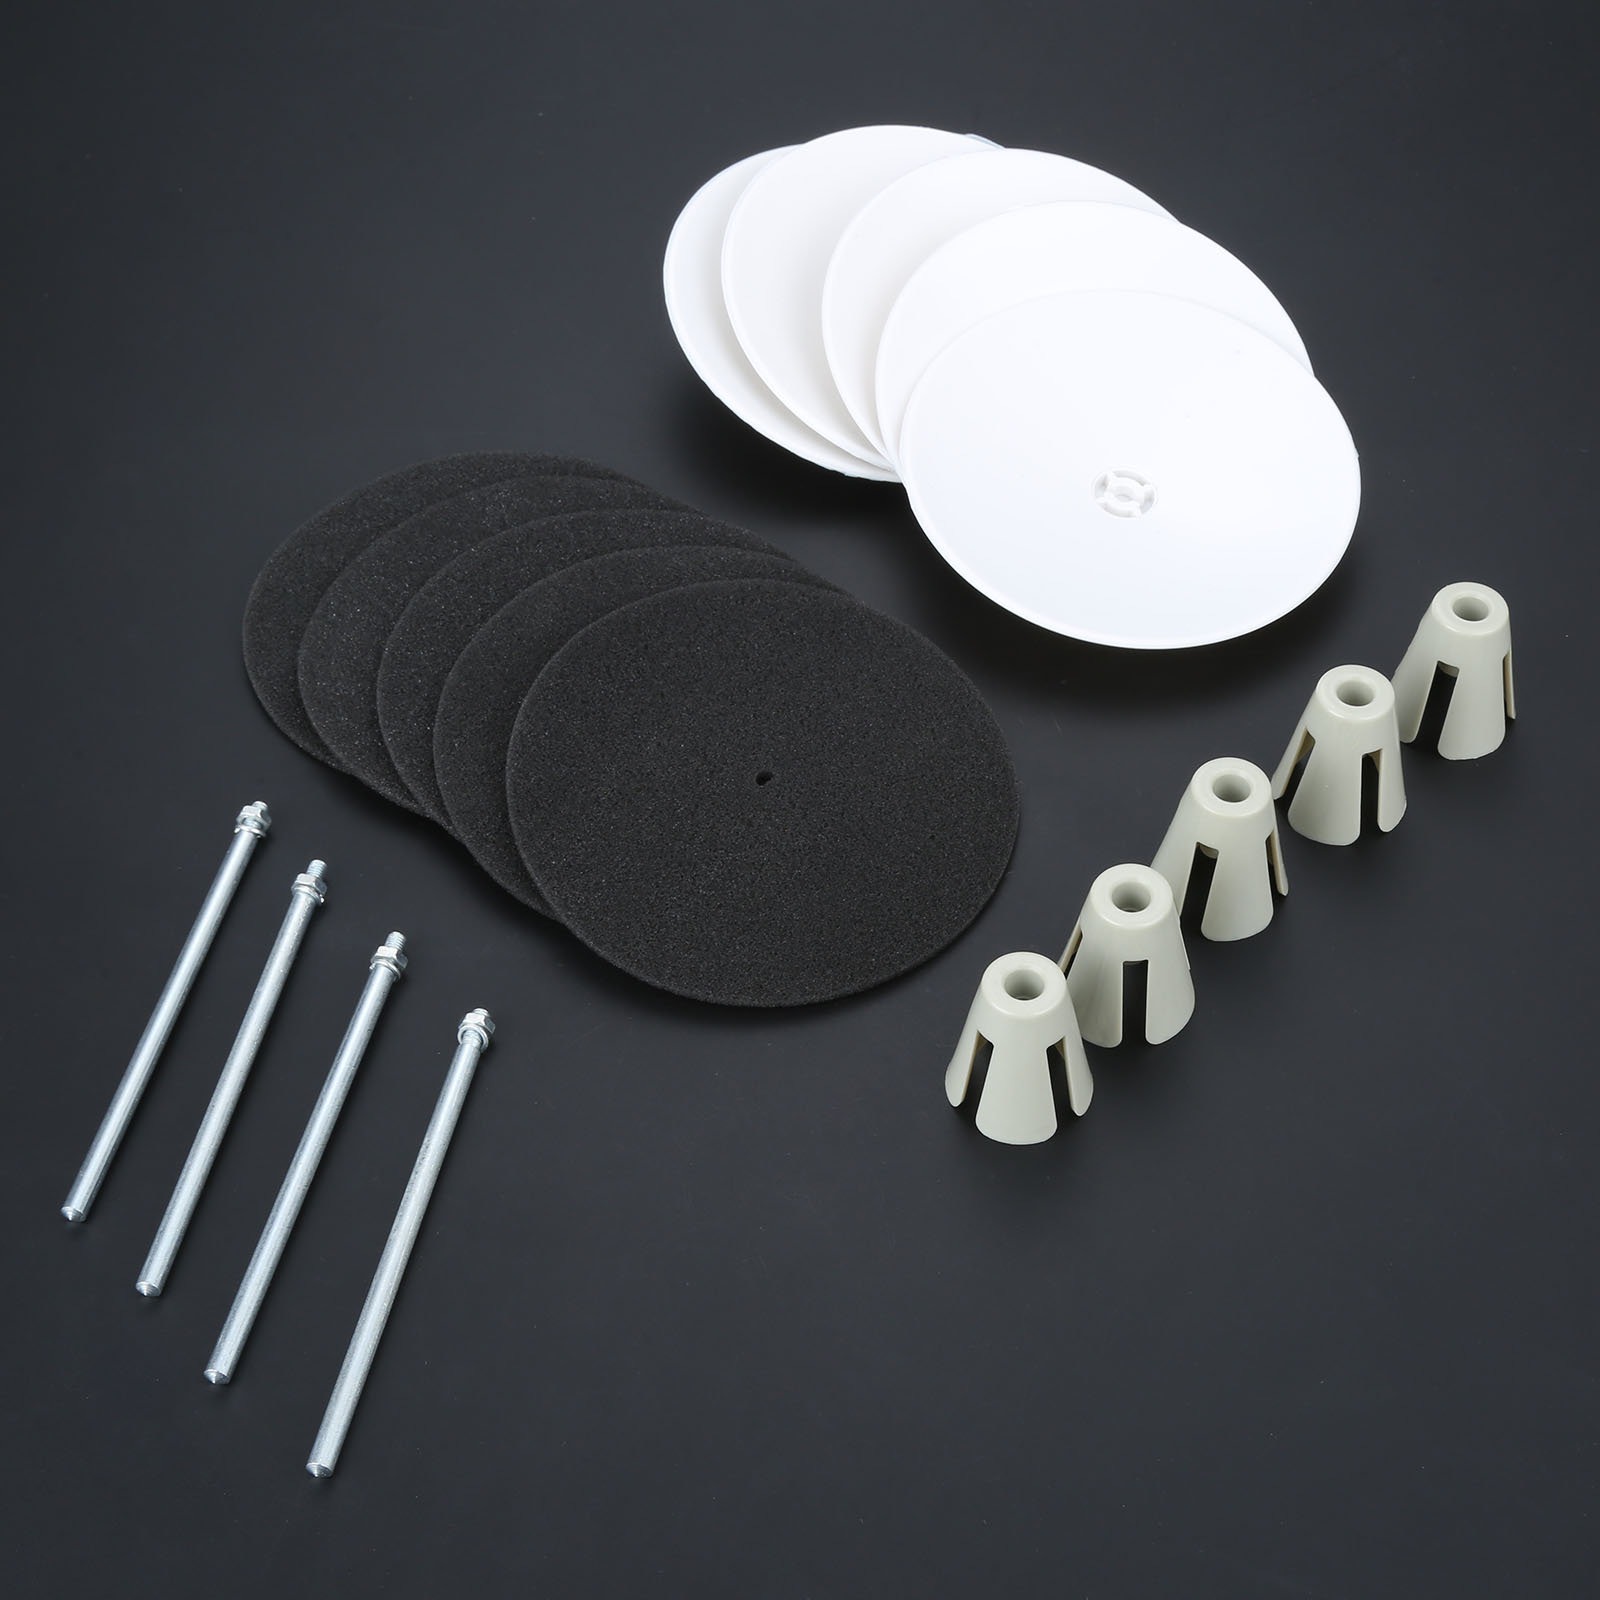 DRELD 4Pcs/set Industrial Sewing Machine Tools Sponge/Pole/Line Claw/Spool Thread Stand Wire Tray DIY Home Clothing Textile Tool